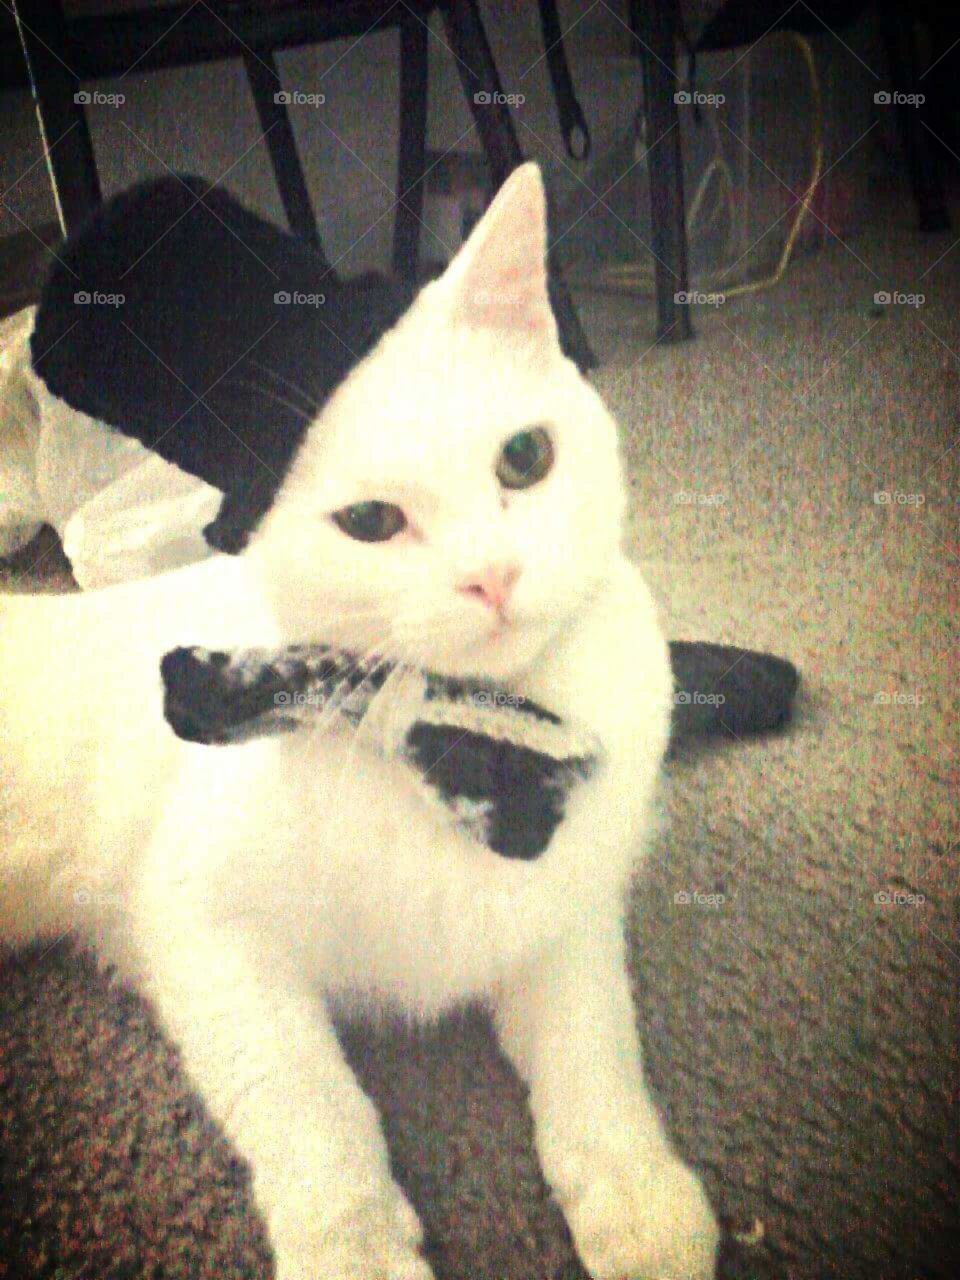 Korin in his tophat and bowtie